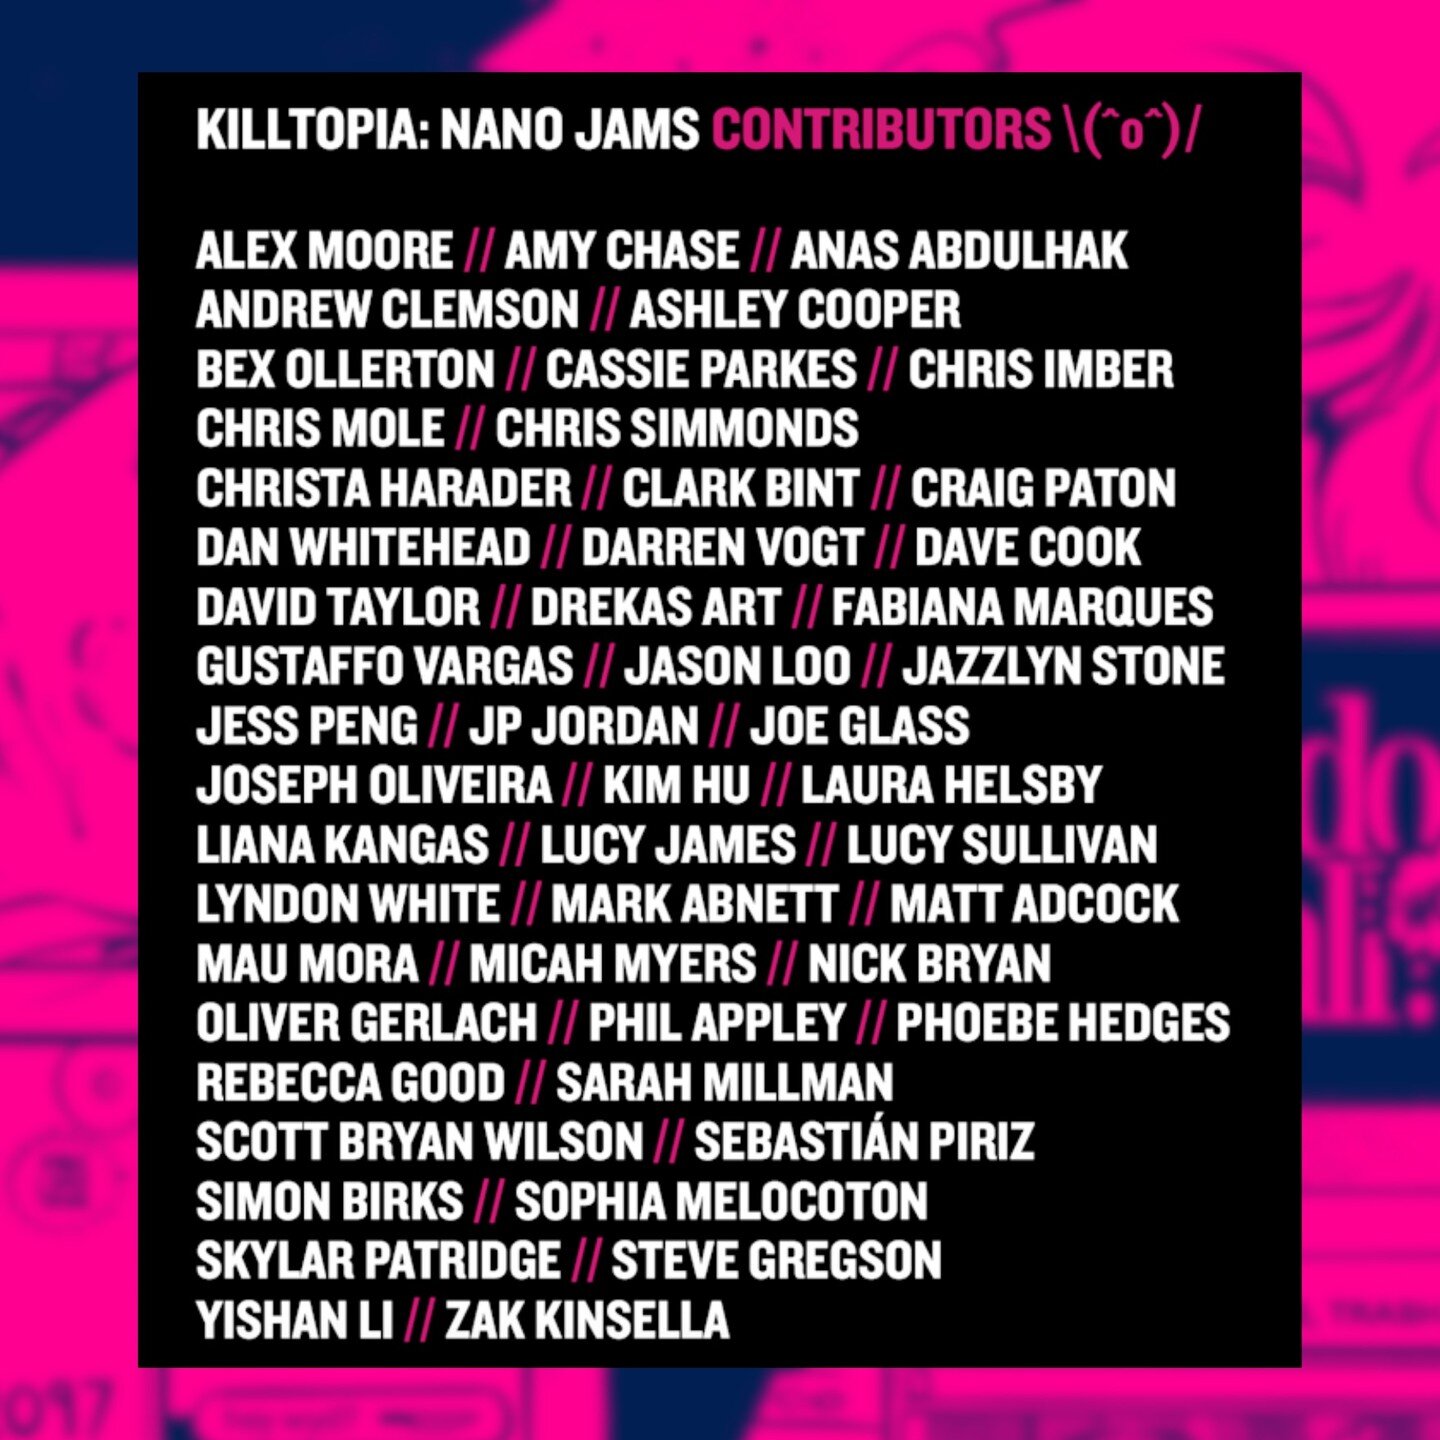 Excited to share that I will be in the Killtopia: Nano Jams with not just one but TWO writers! You can find it live on Kickstarter! Join me and my buds like @jazzlynstone, @lucysullivanuk, @amythunderjam, @jasonloomakescomics, @jpthwip, @skyepatridge